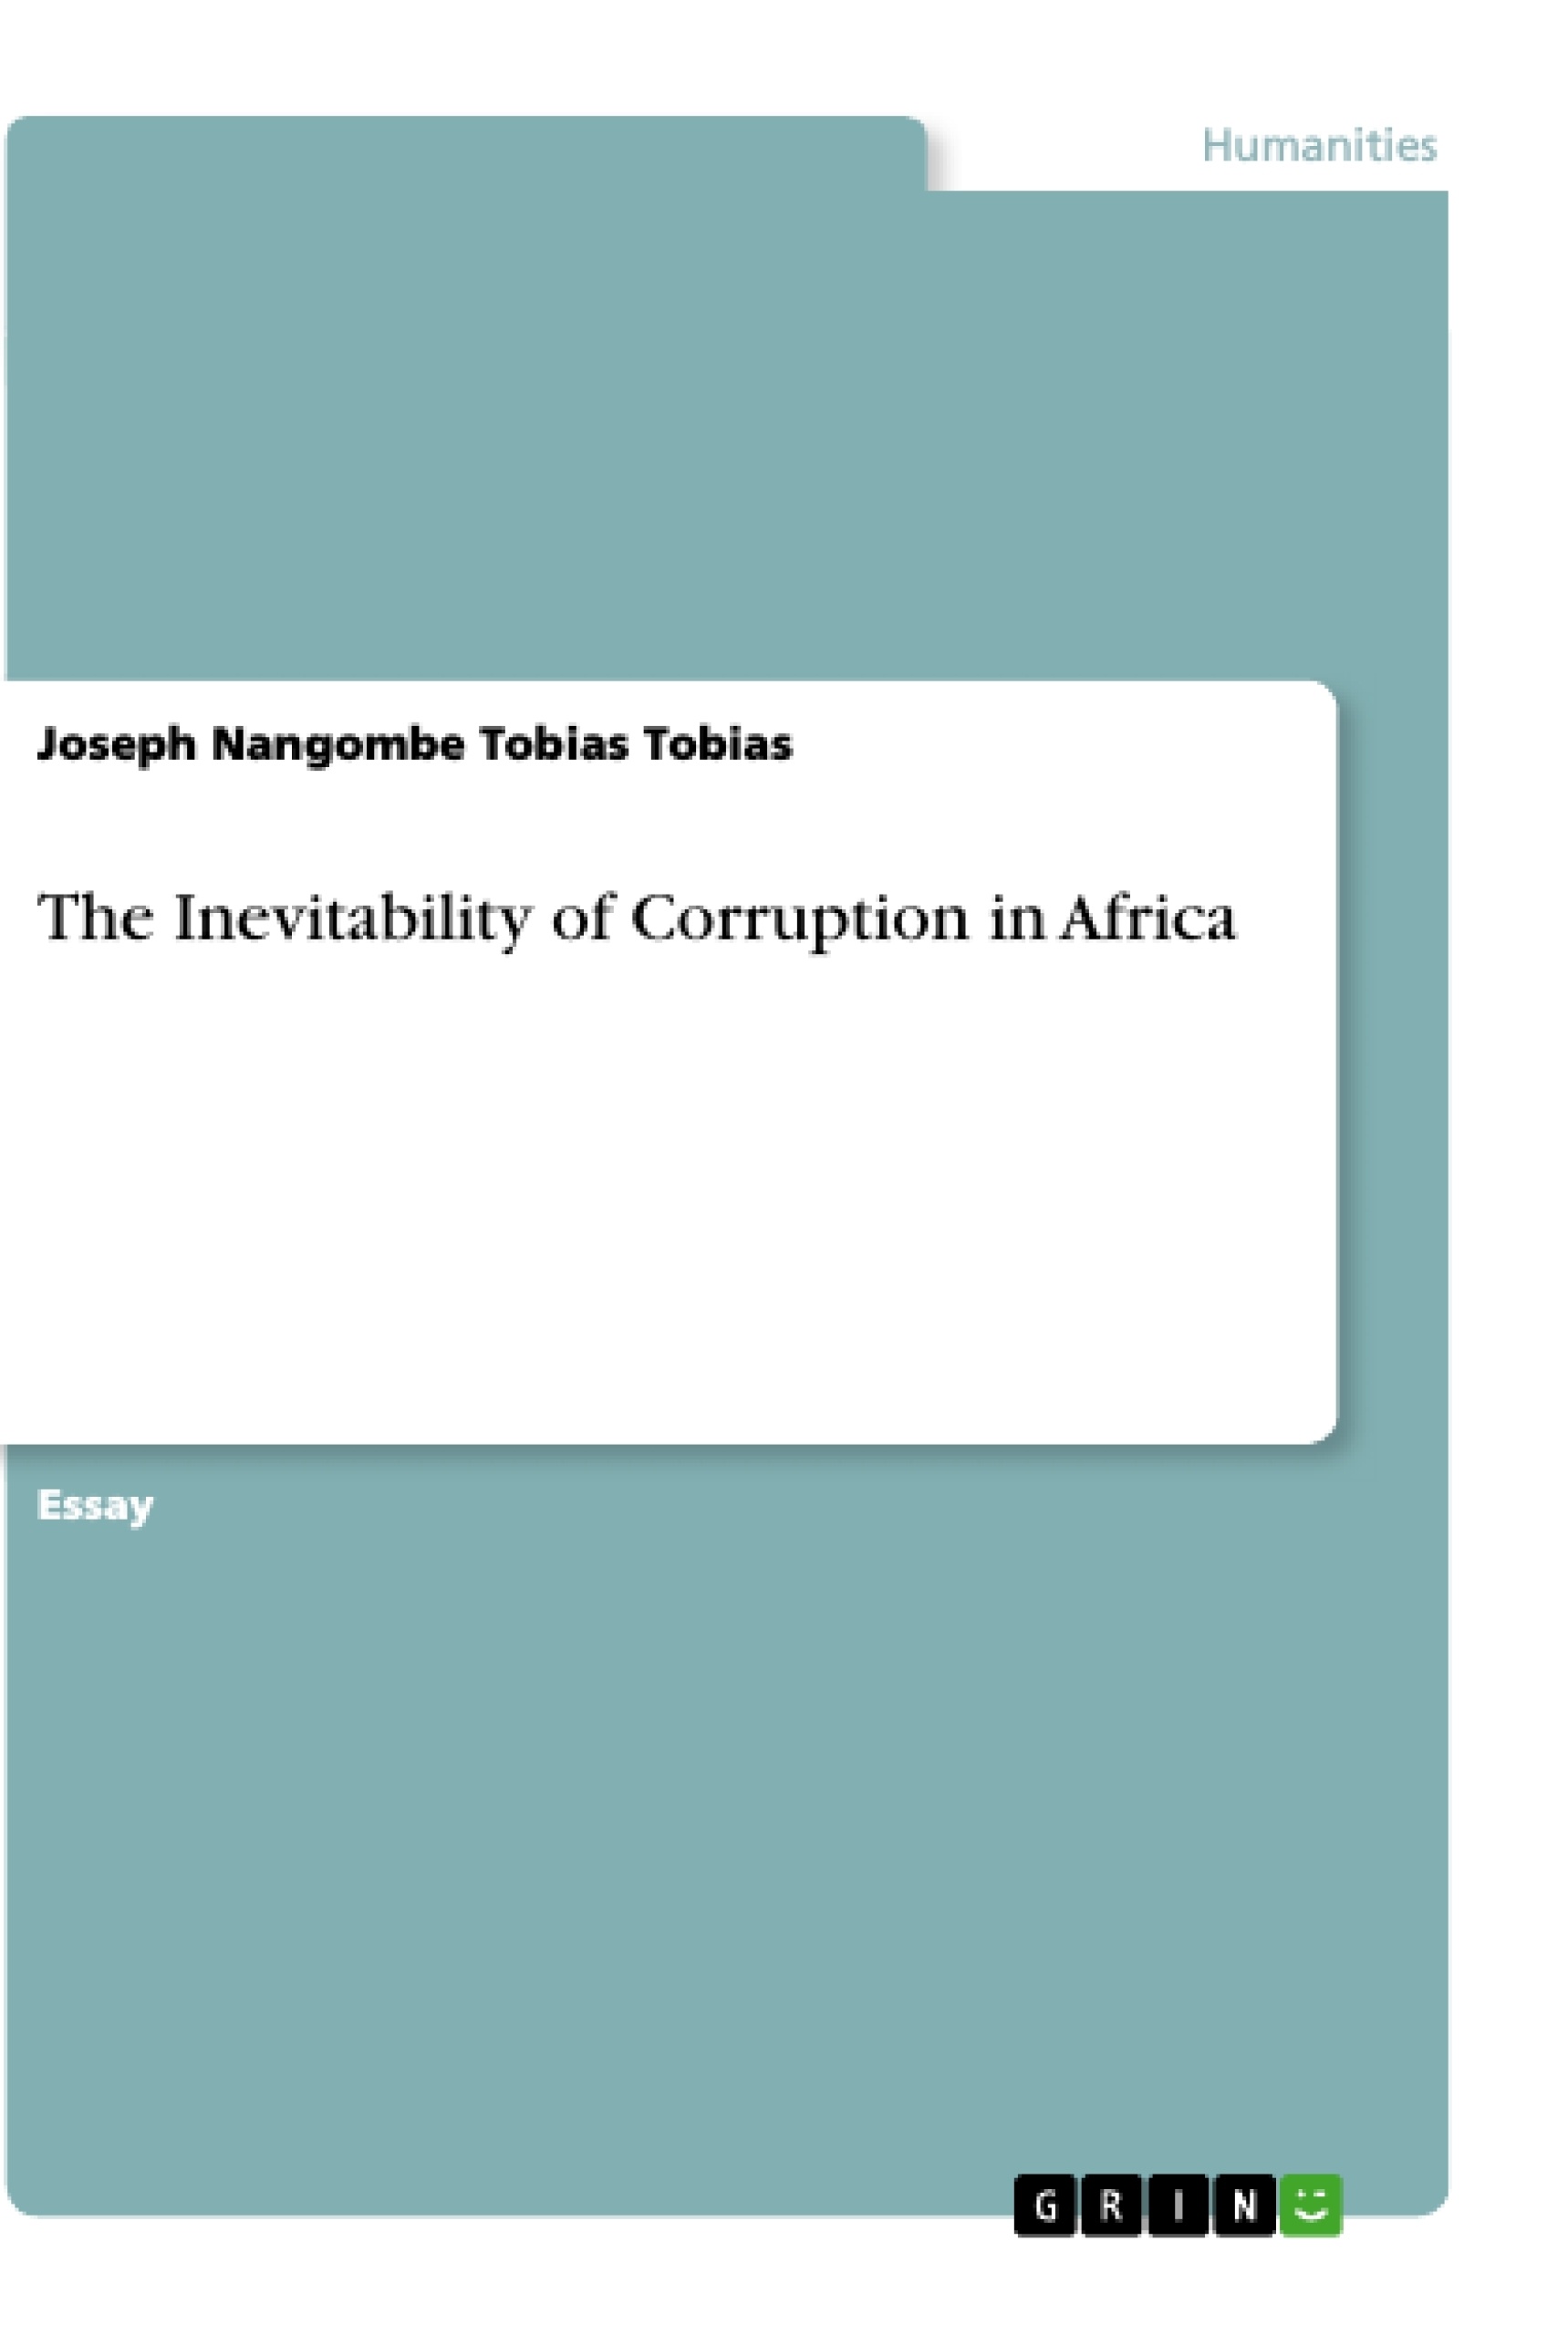 Title: The Inevitability of Corruption in Africa